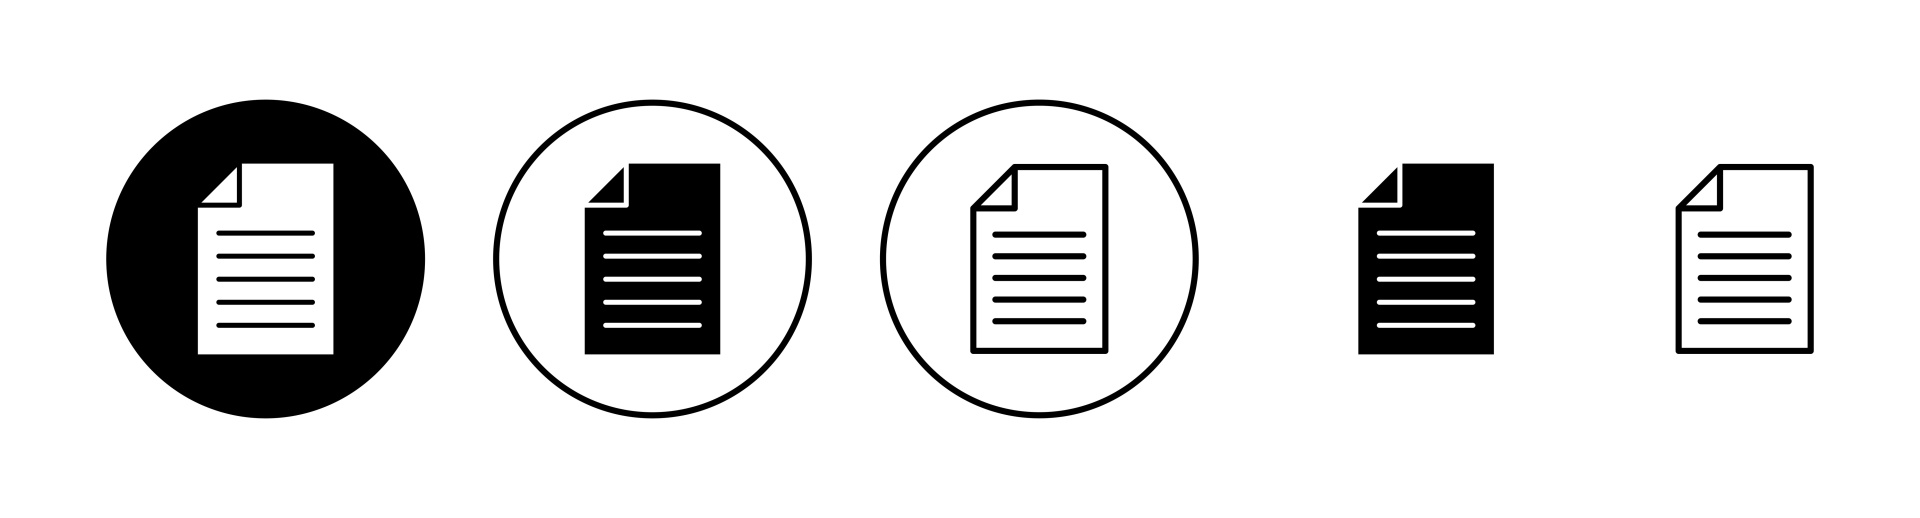 An icon that showcase 3 resumes that are in black and white